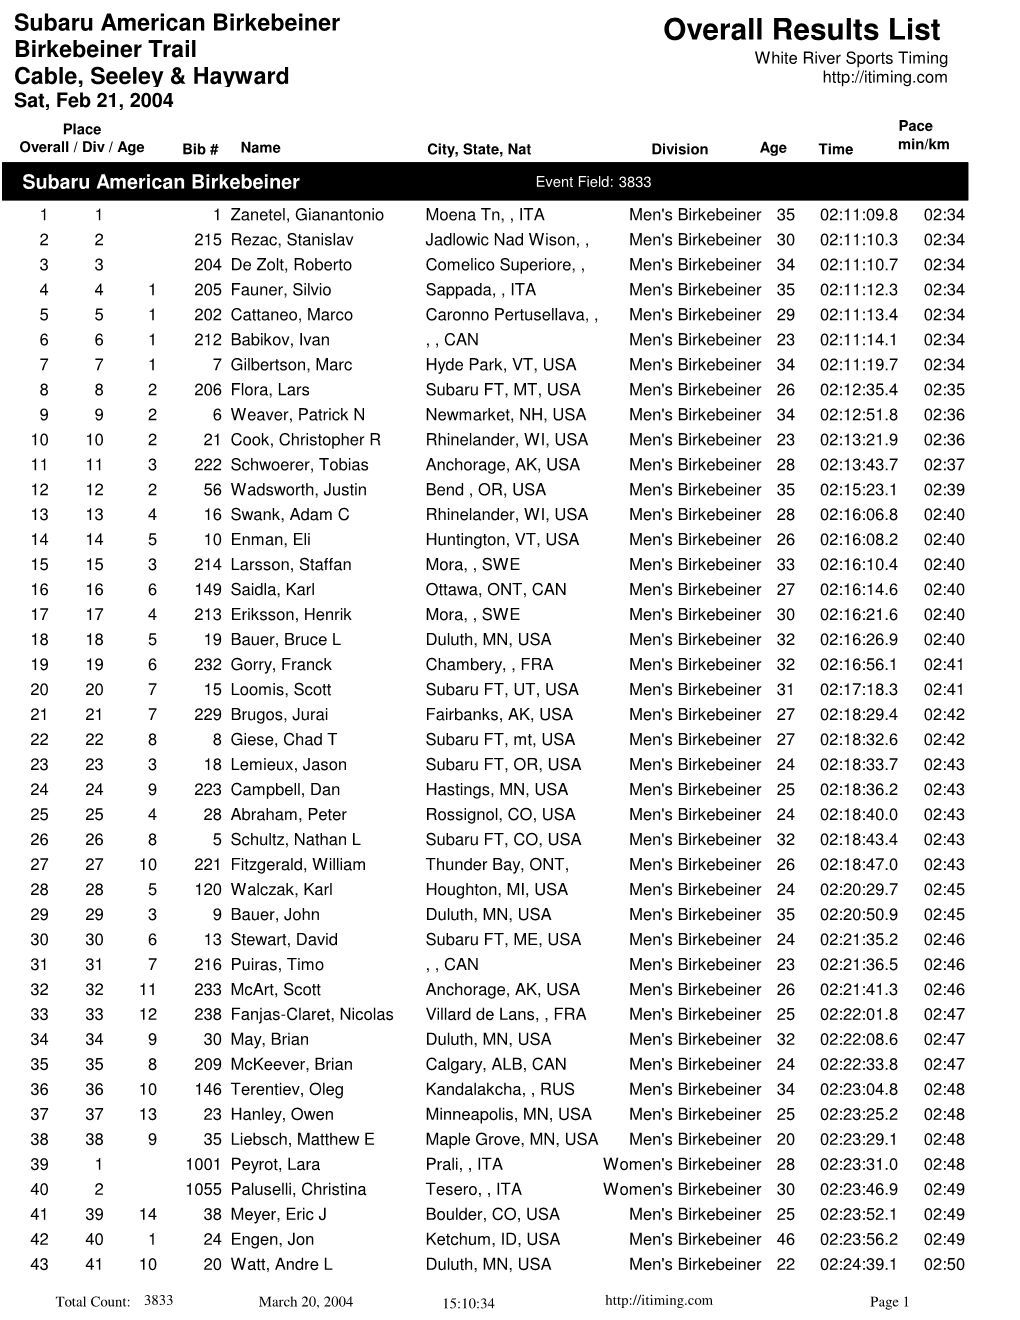 Overall Results List